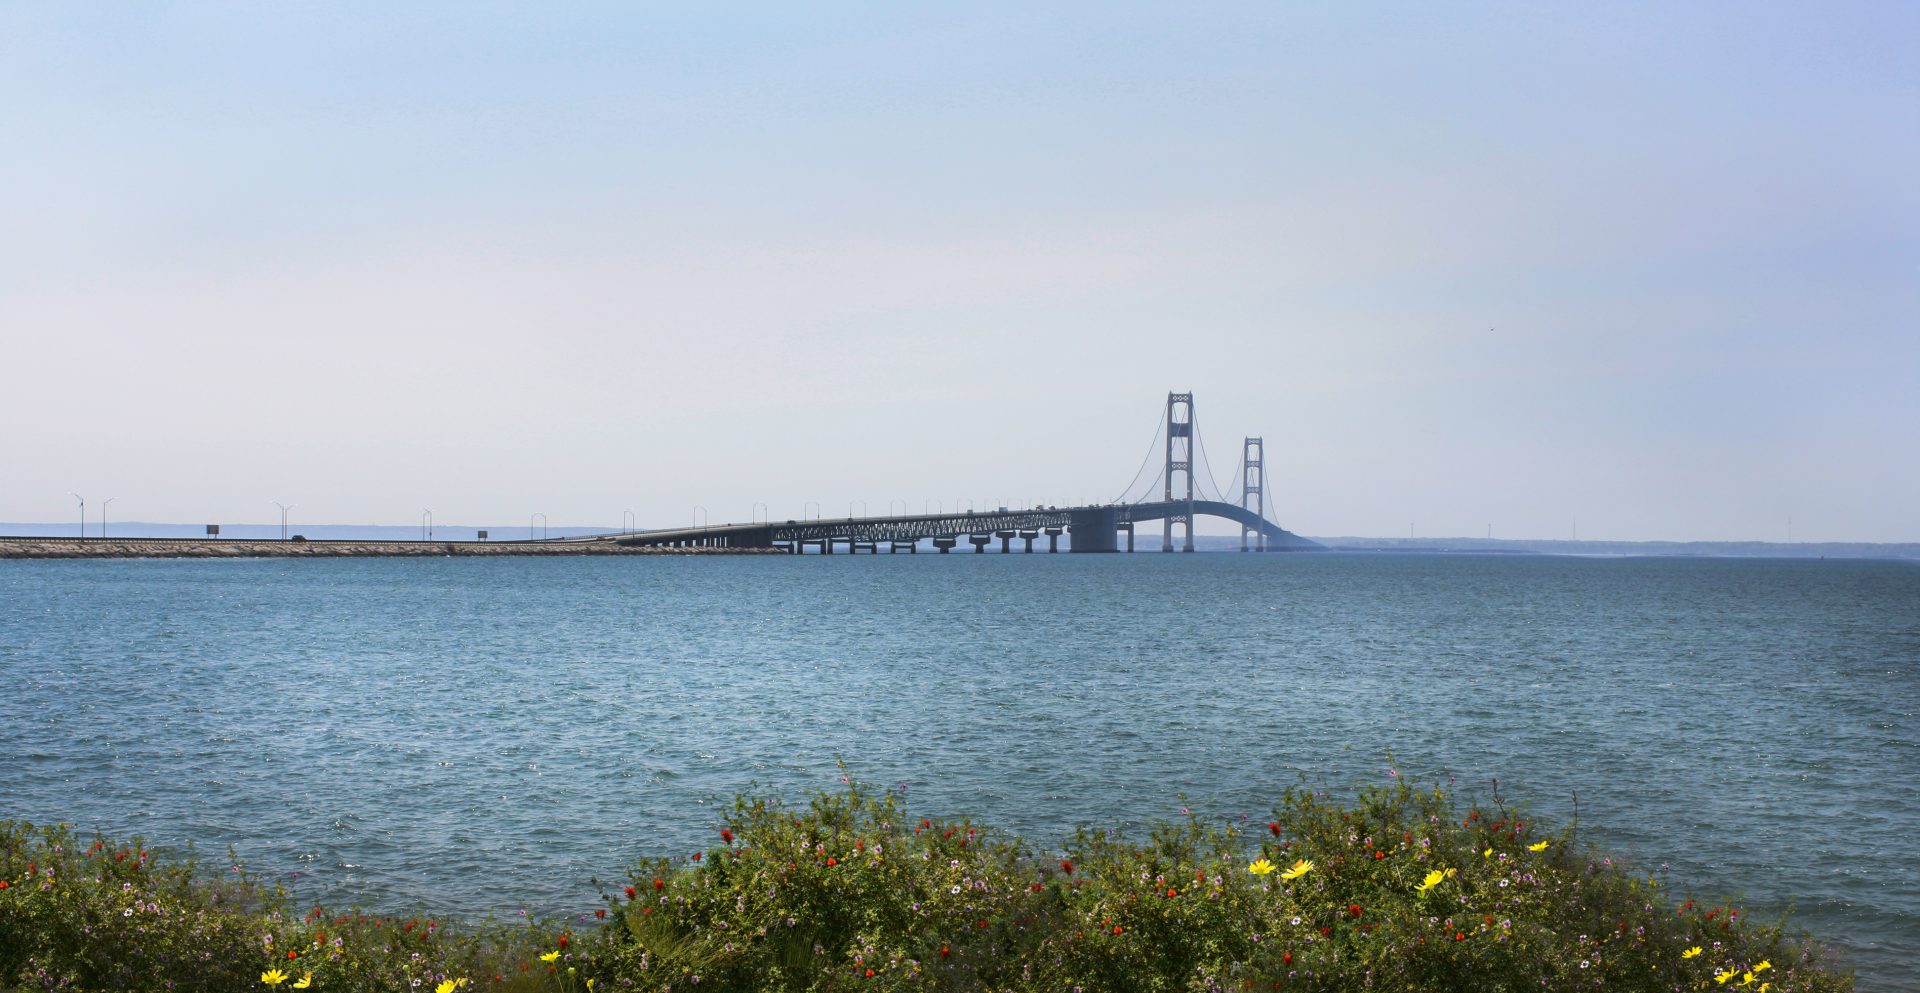 Mackinac Bridge viewed from shore with flowered bushes in the foreground